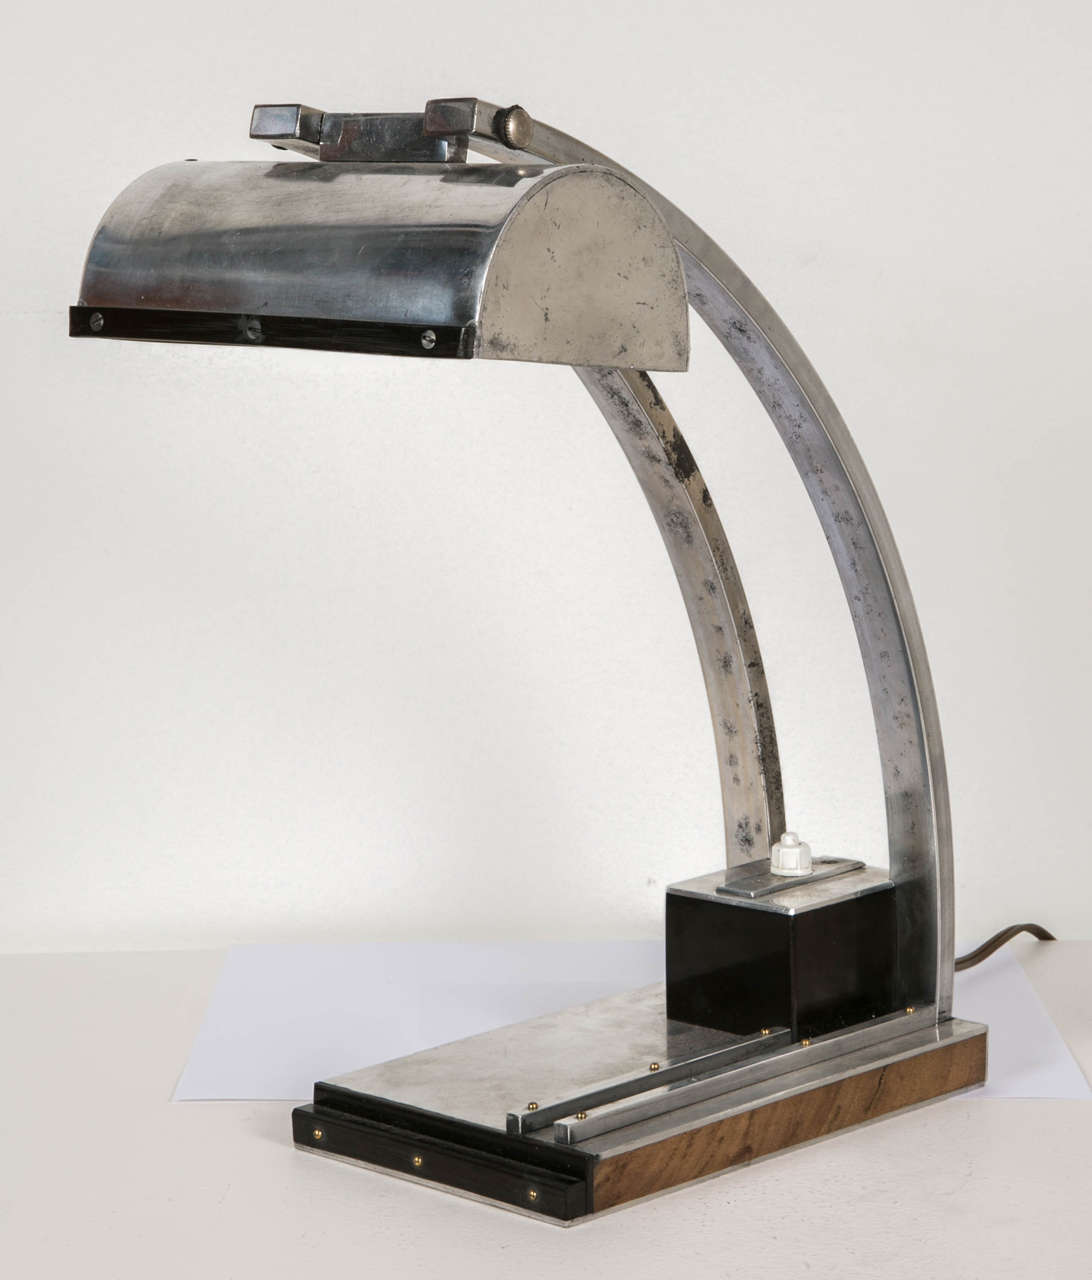 Modernist desk lamp in chrome metal, hard rubber and natural wood architected base supporting a semi-cylindrical lampshade. French work of the 1930s in the spirit of Jacques Le Chevallier and René Koechlin.
European standard wiring.